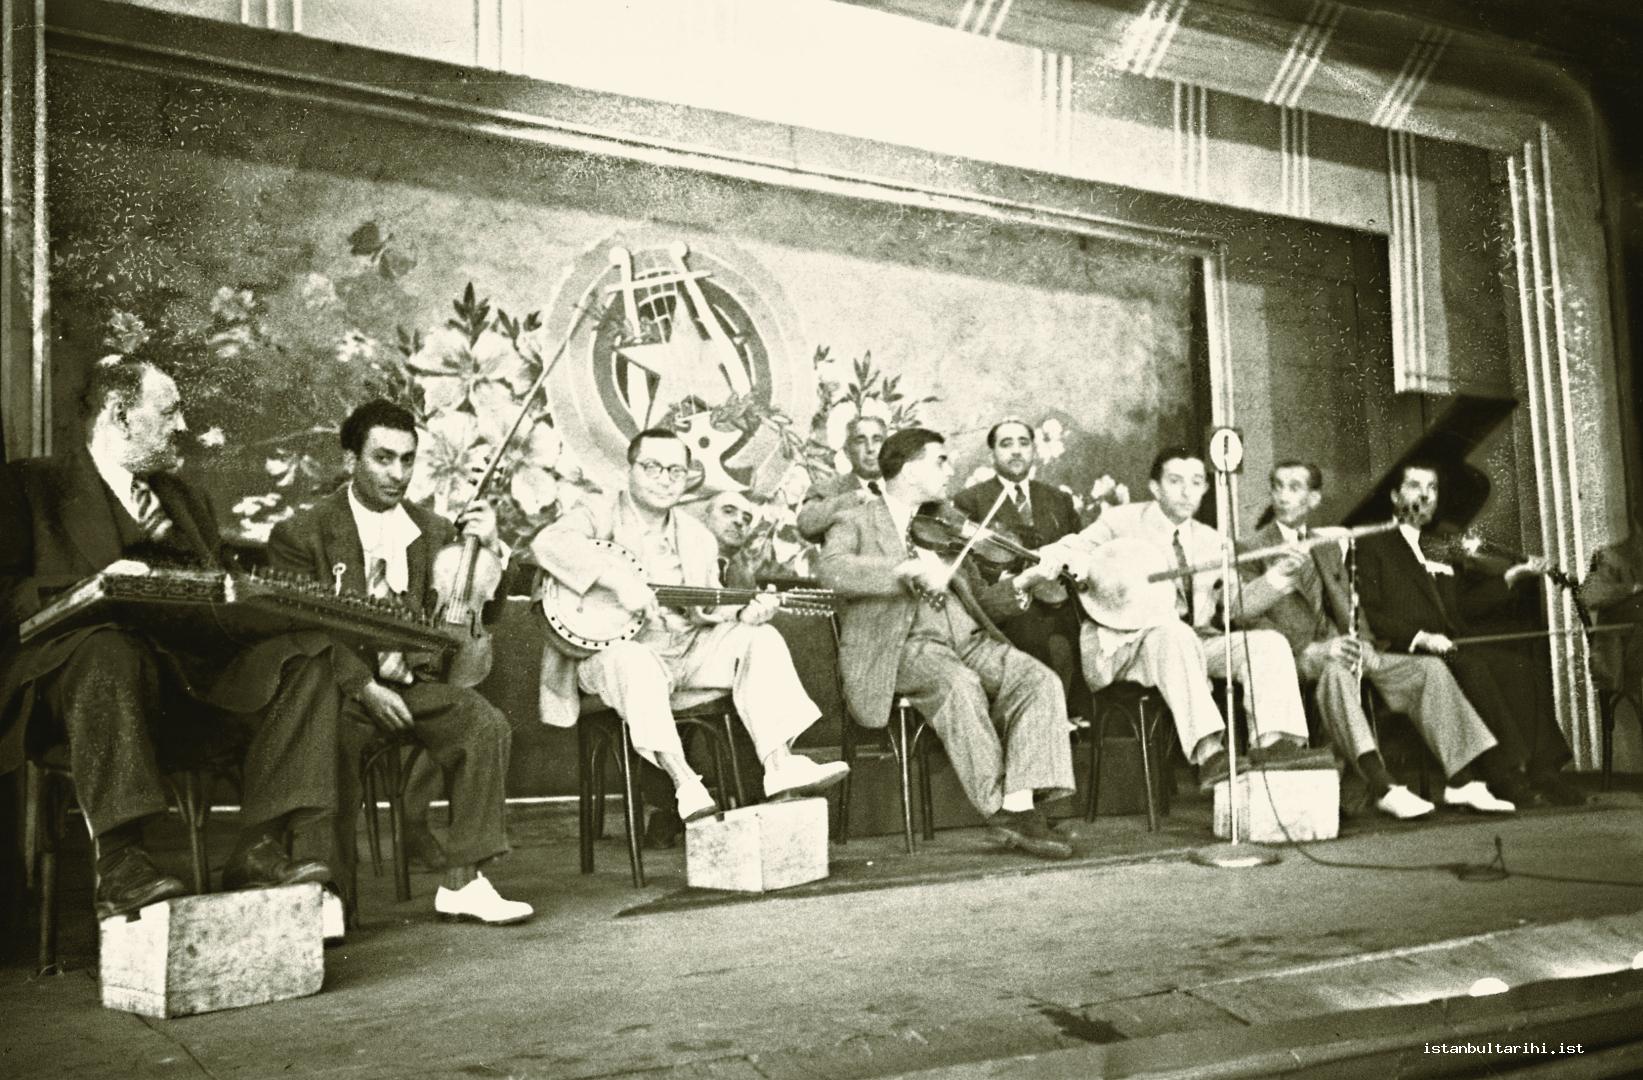 10- Scenes from the life of music in 1940s. Tanbur player and composer Selahattin Pınar and Sa ye Ayla are singing on the stage. There are famous players such as Yorgo  Bacanos among the group of instrument players.